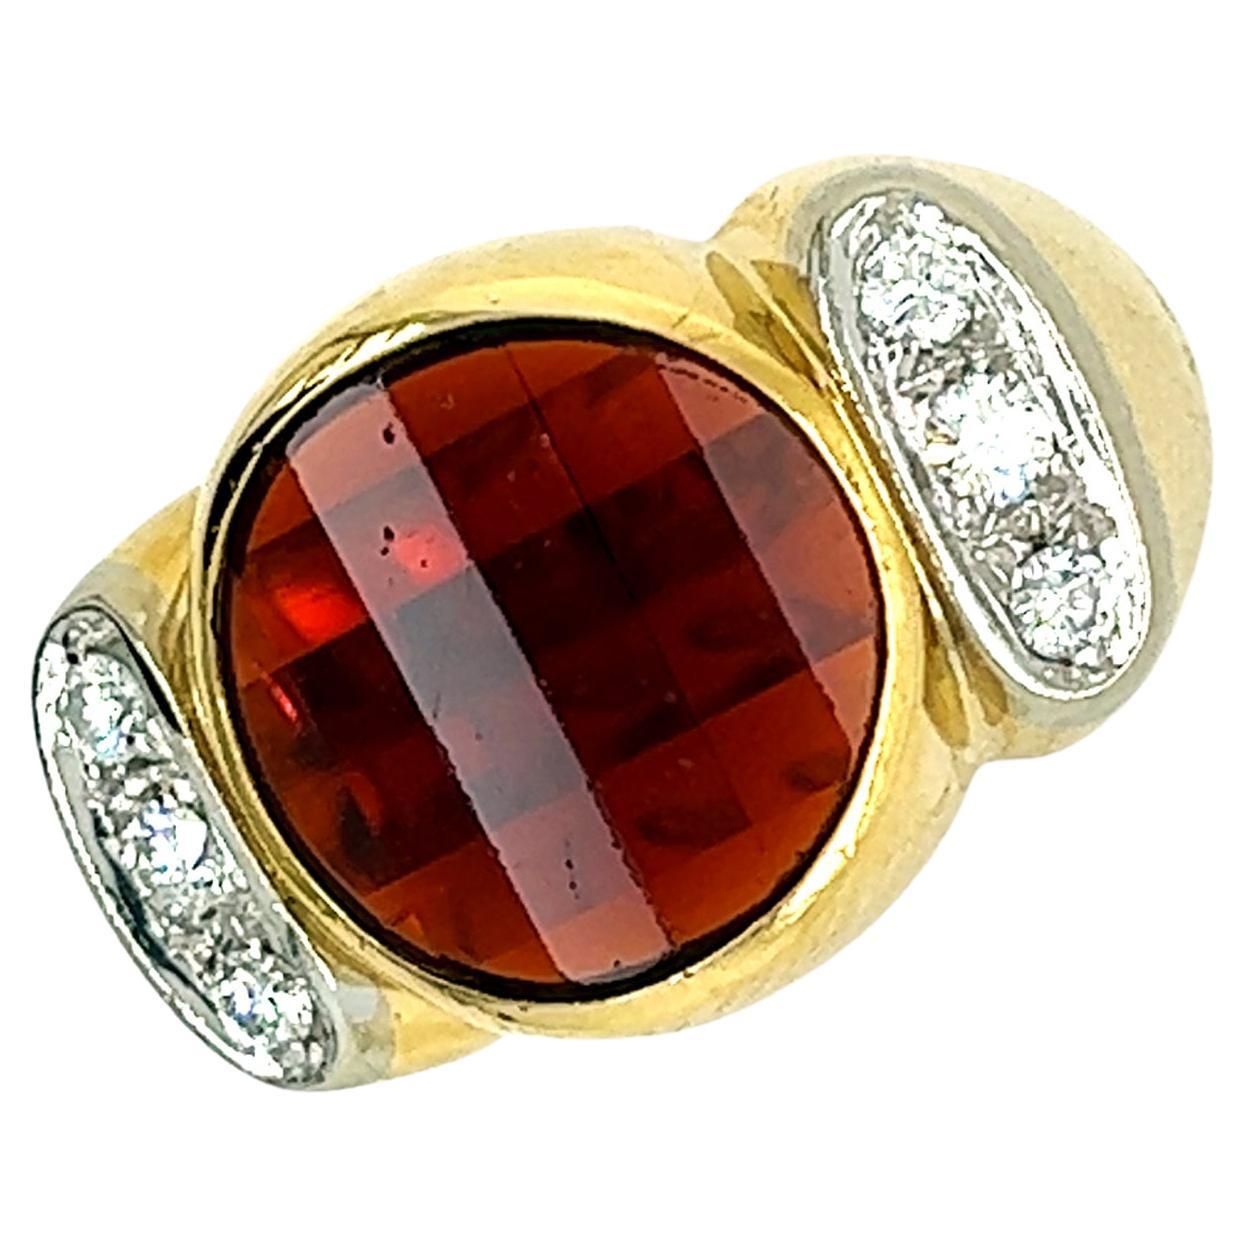 One-of-a-kind, Extra-ordinary, Original 1988 Chic and absolutely Timeless Pomellato A1136 Cocktail Ring, here declined in the precious hand inlaid faceted garnet and diamond version, a beautiful example of Italian Craftsman of the period: circa 0.15